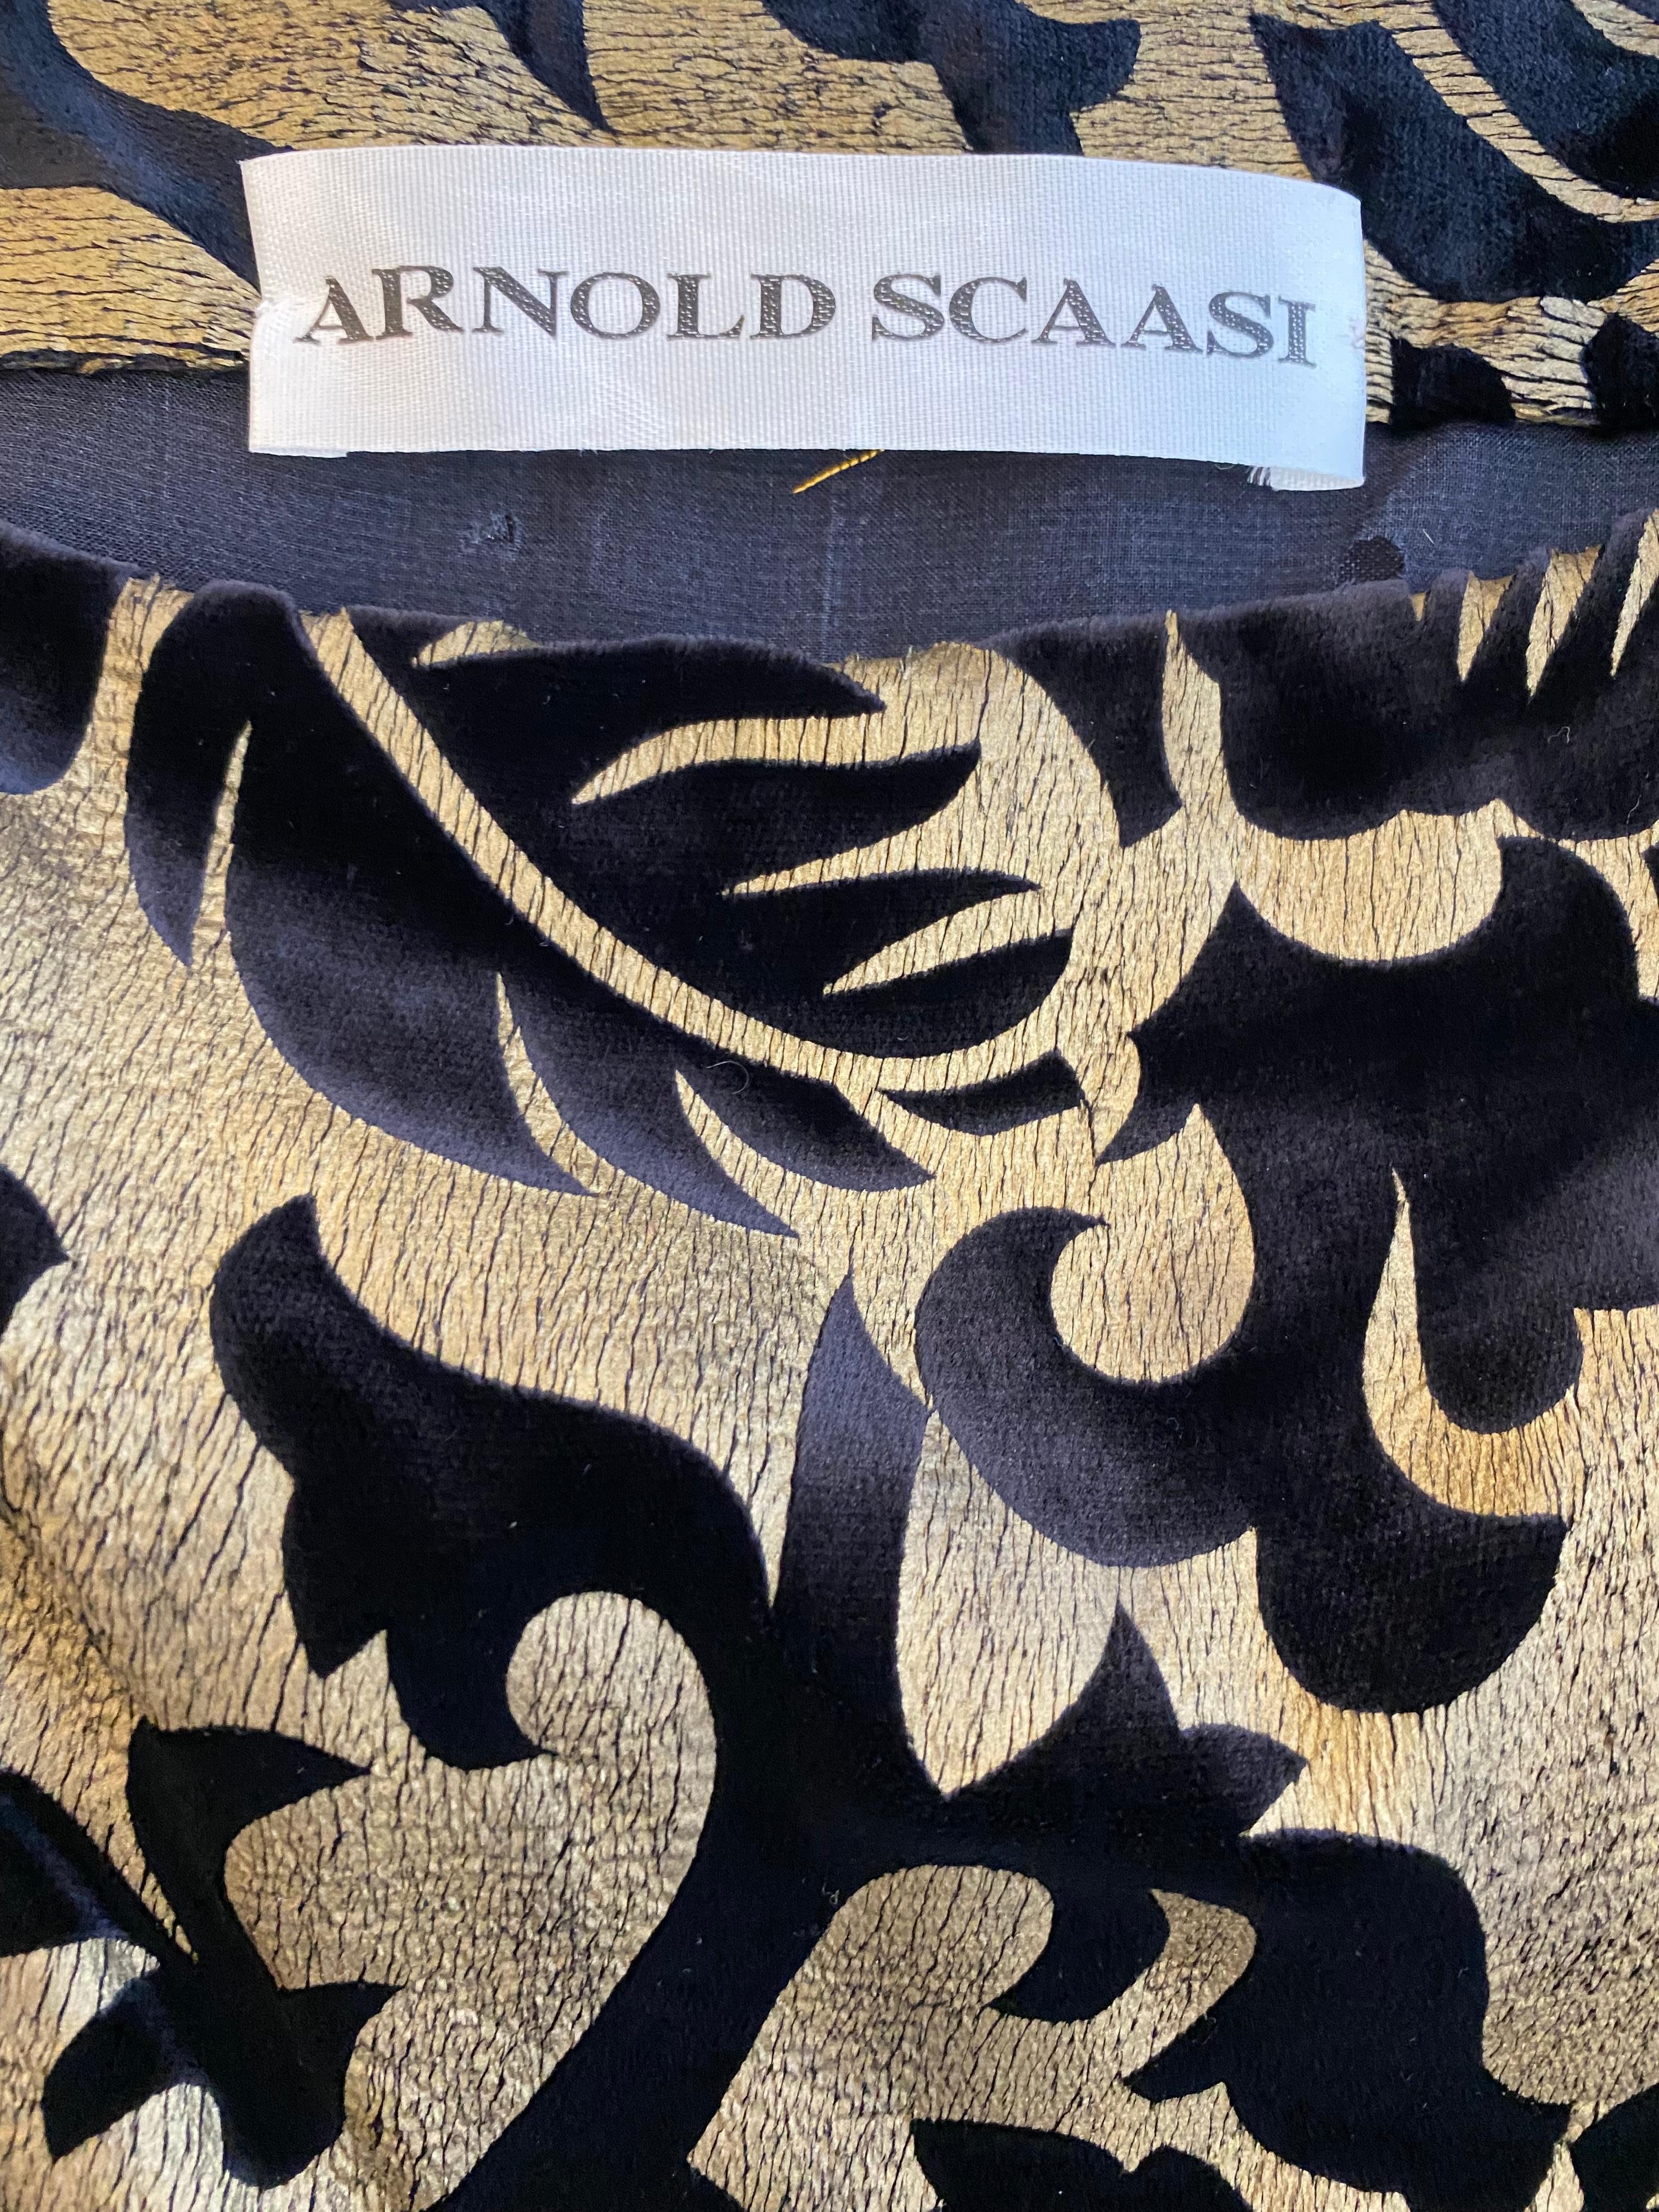 Beautiful 1970s Arnold Scaasi Black and Gold velvet flocked “ Poiret” Inspired Print Gown.
Sleeveless - bateau  neckline. Perfect for Holiday Cocktail Party or Black tie event.
Size: Small/ 0/2
Bust: 32” / waist: 24”length: 61”